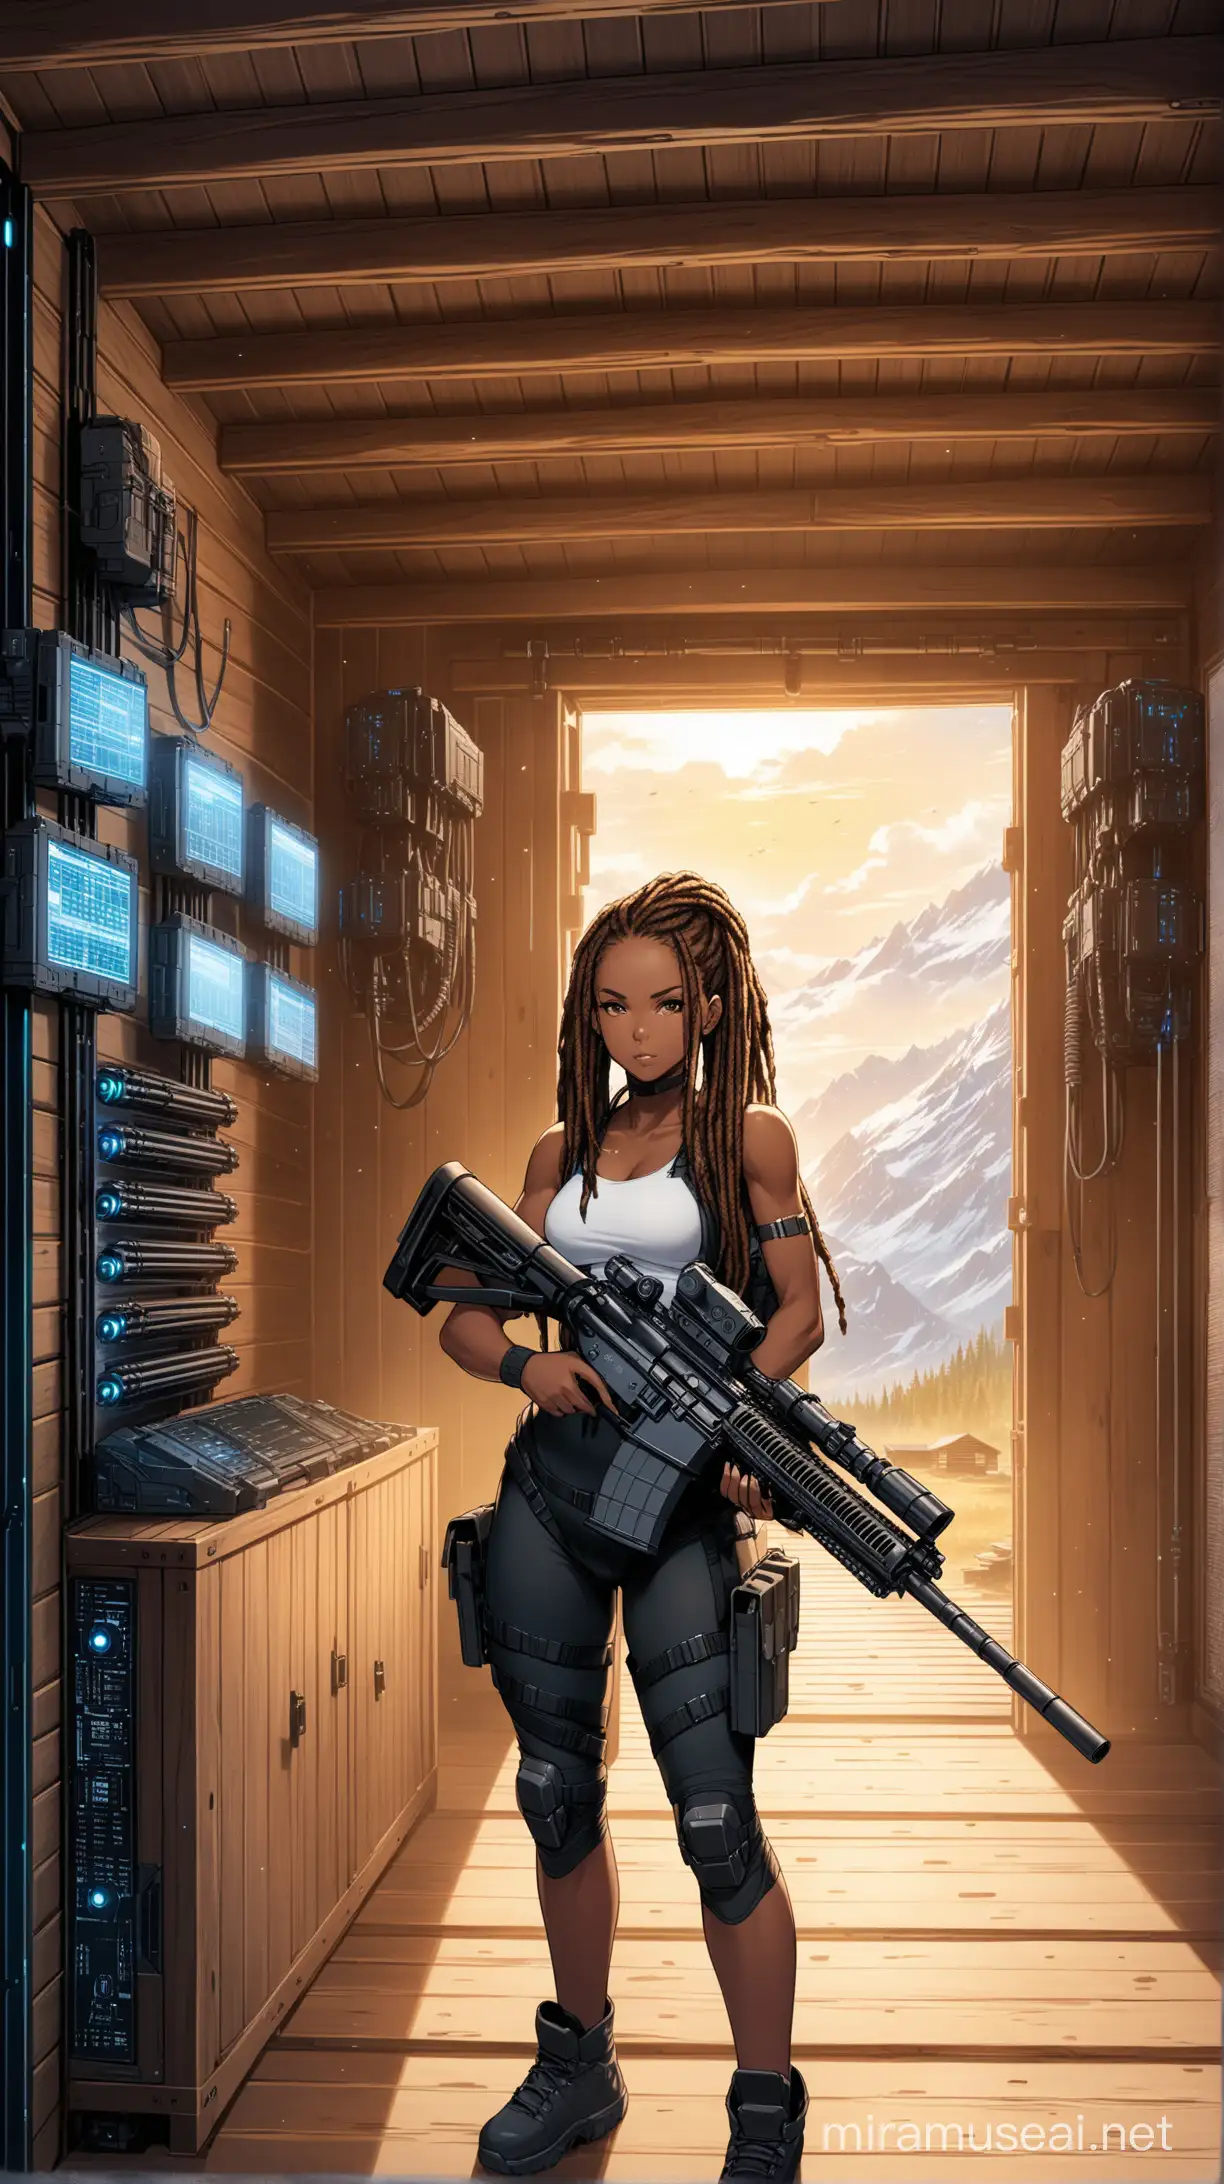 battle read black girl with dreads holding massive automatic rifle in wooden cabin surrounded by high tech equipment.